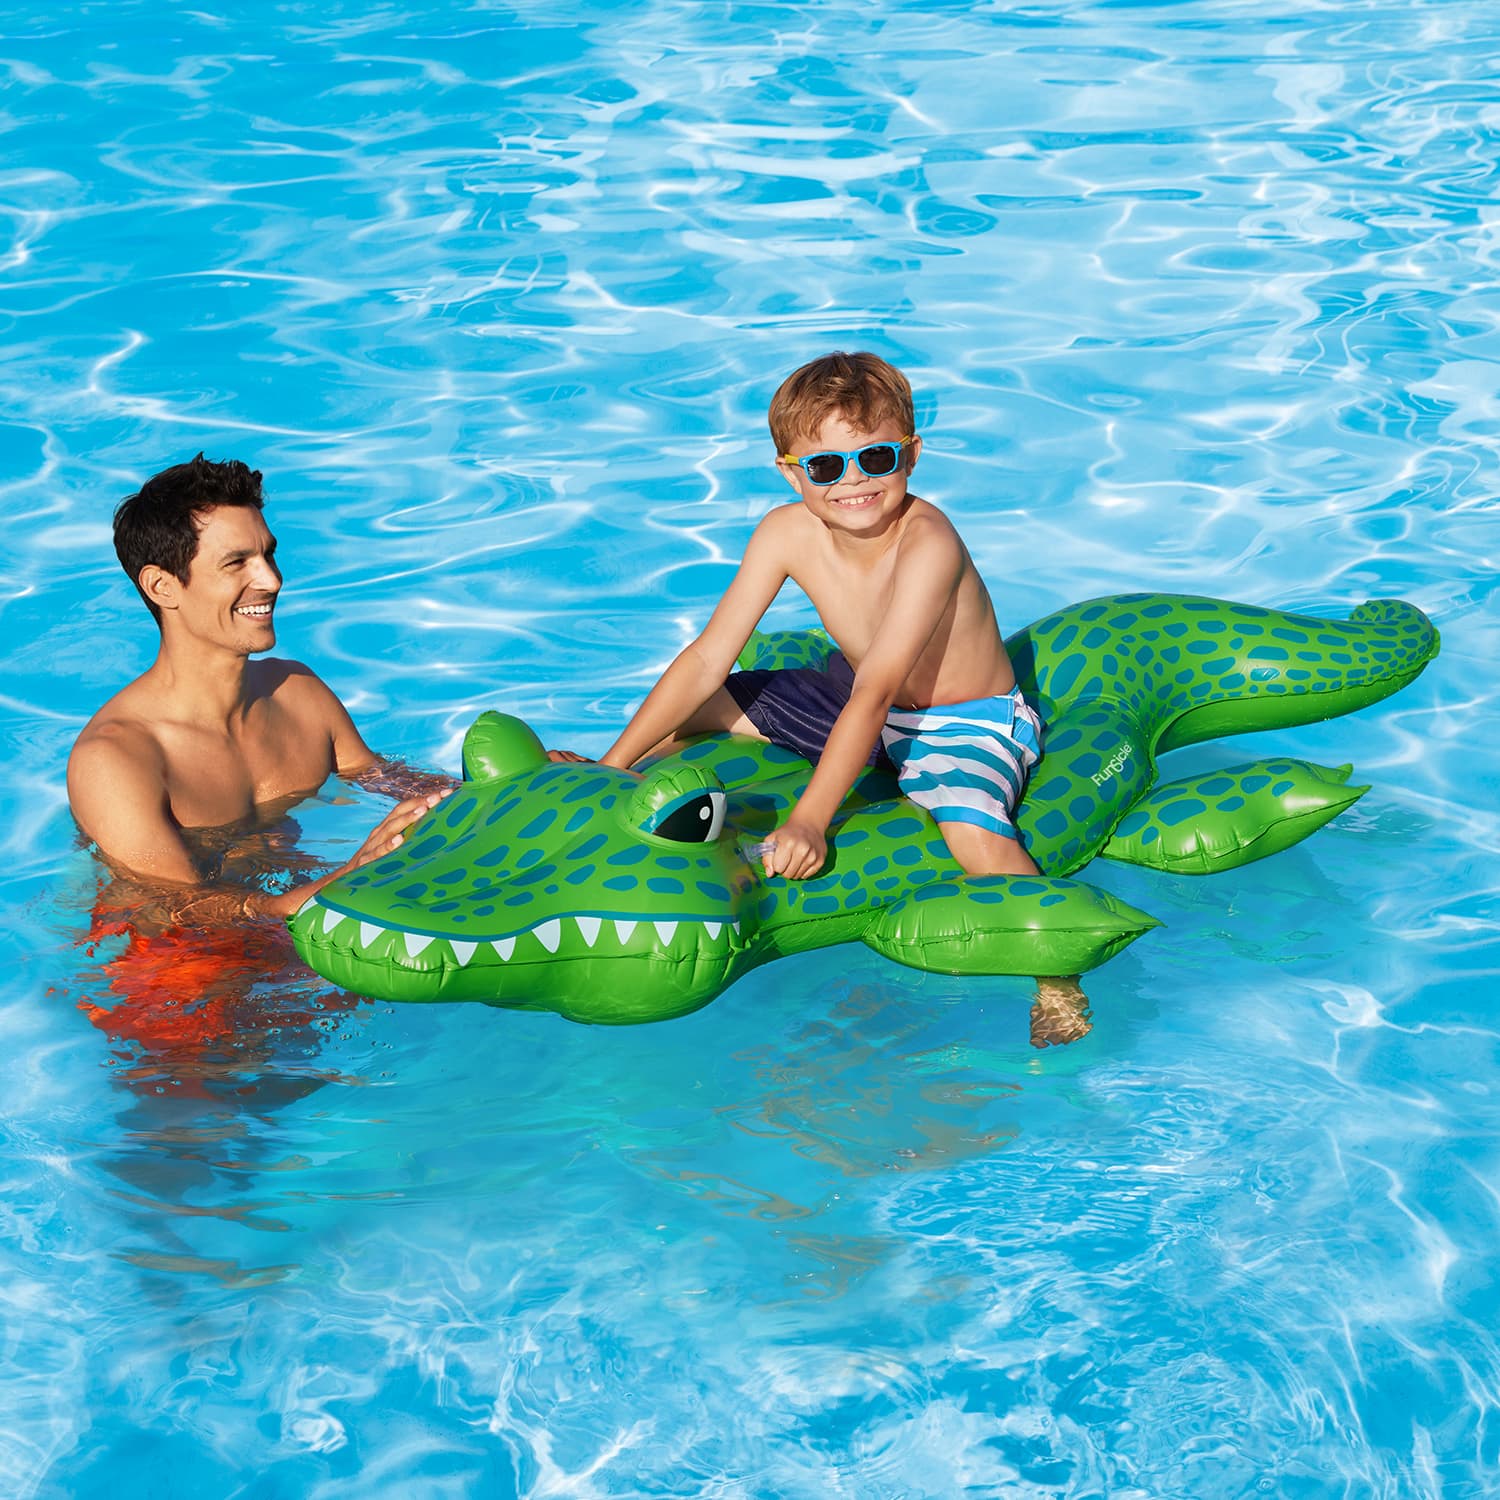 Funsicle Hungry Gator Ride-On with two models around it in a pool